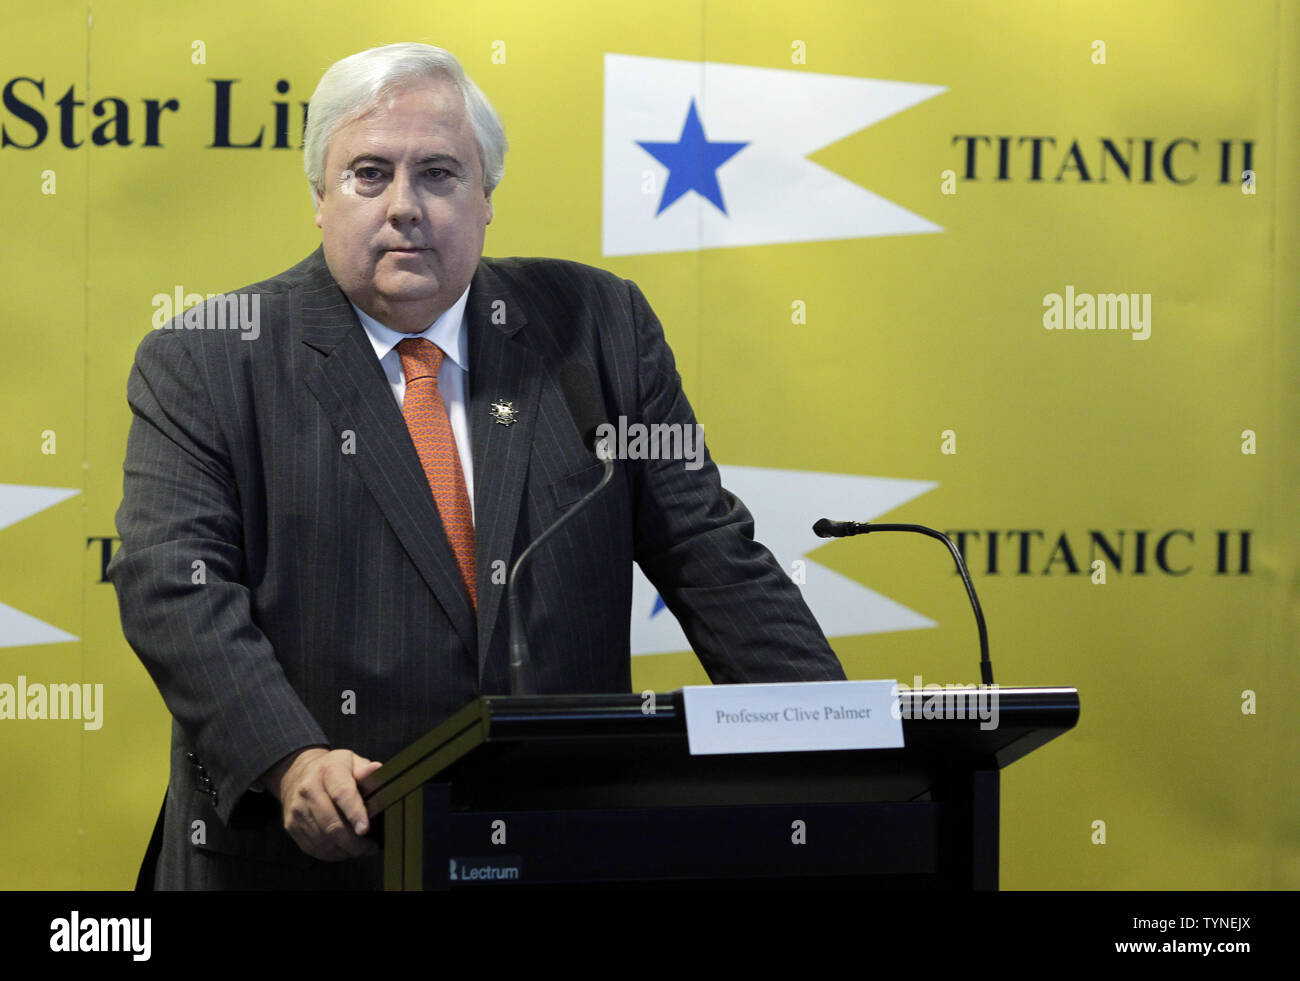 lindre Næste deres Australian billionaire and chairman of the shipping company Blue Star Line,  Clive Palmer, discusses plans for the company's planned Titanic II cruise  ship at the Intrepid Sea, Air & Space Museum in